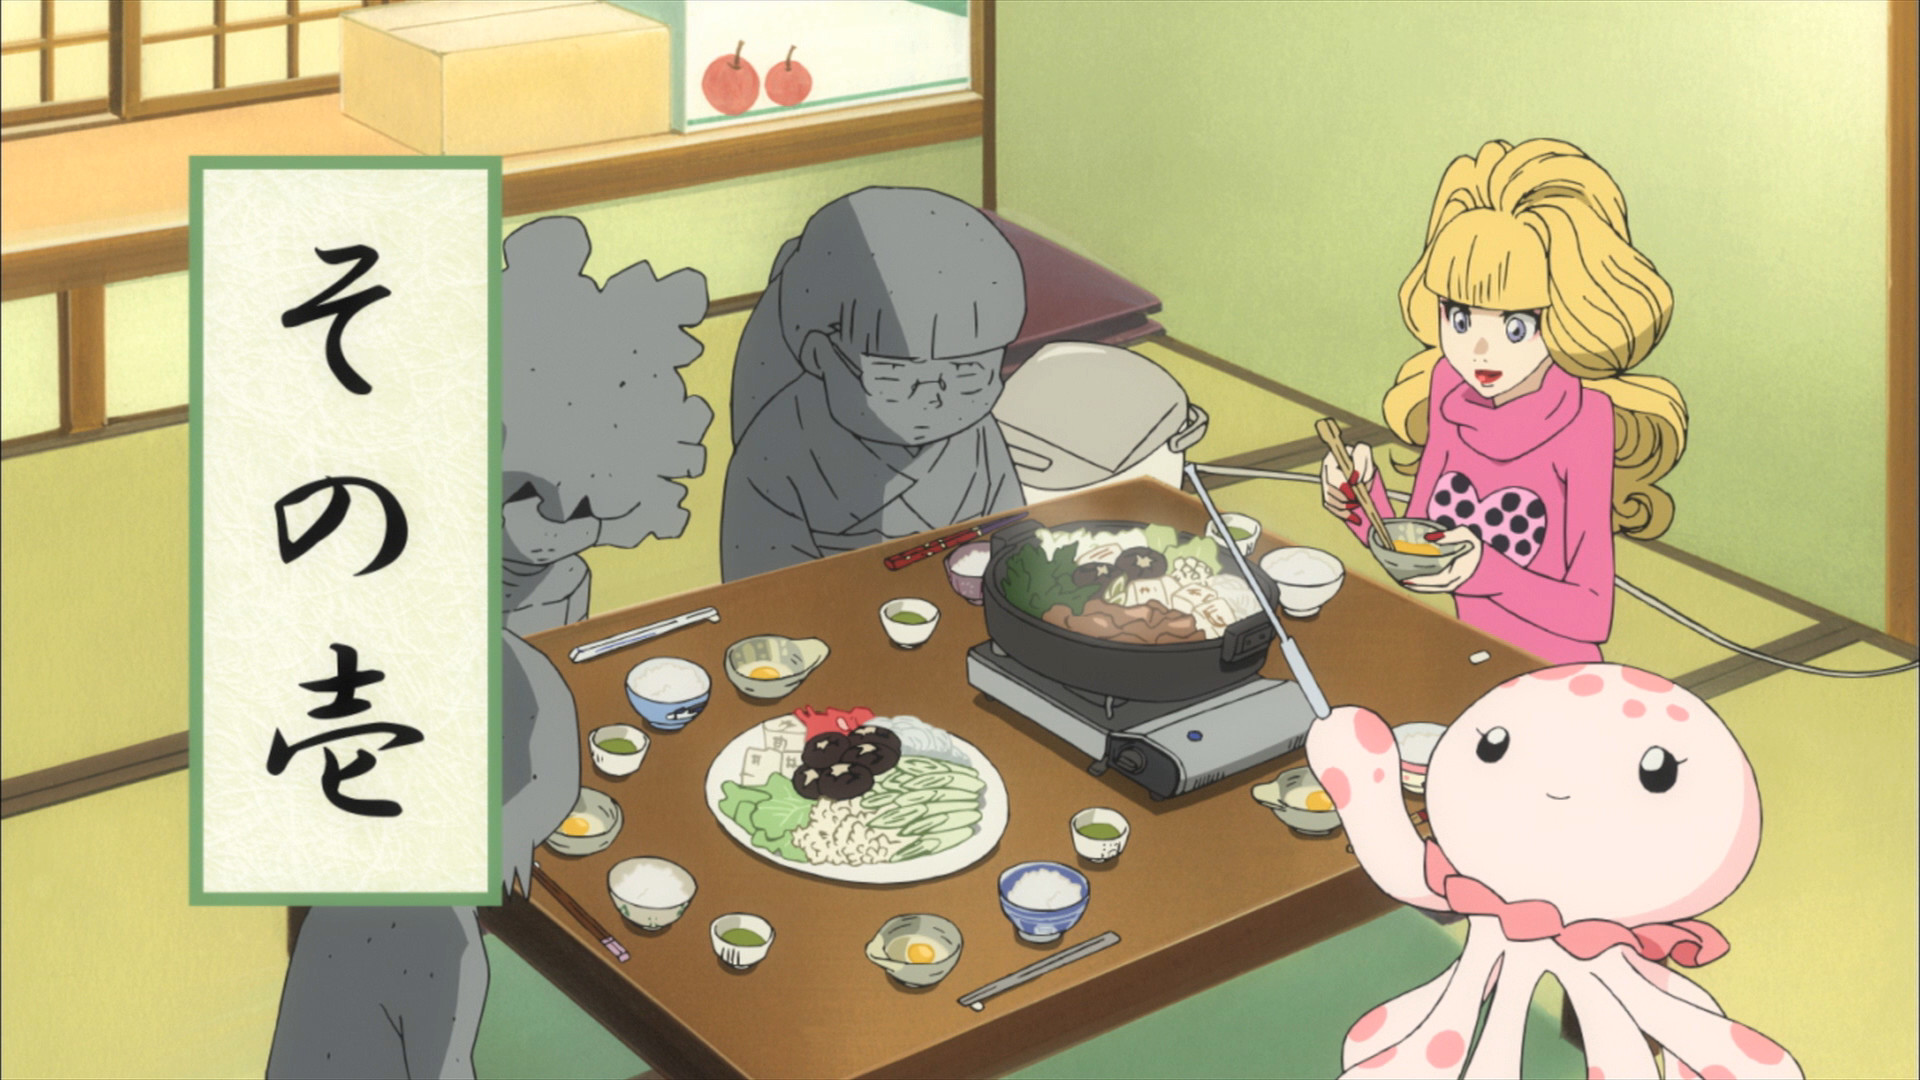 1920x1080 Princess Jellyfish: The Complete Series (Blu-ray) : DVD Talk Review of the  Blu-ray